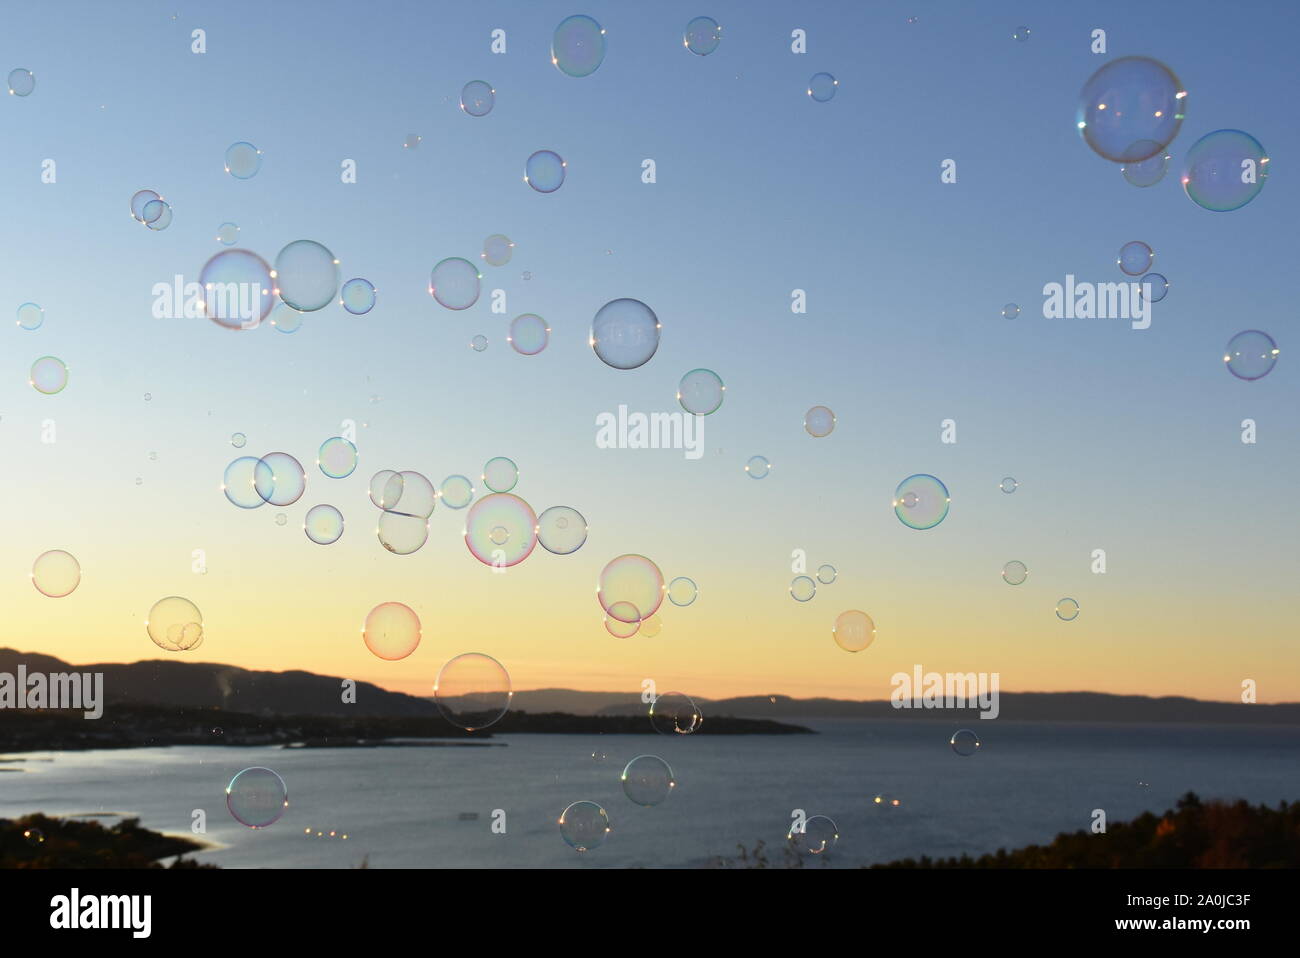 Sunset seascape with lot of soap bubbles Stock Photo